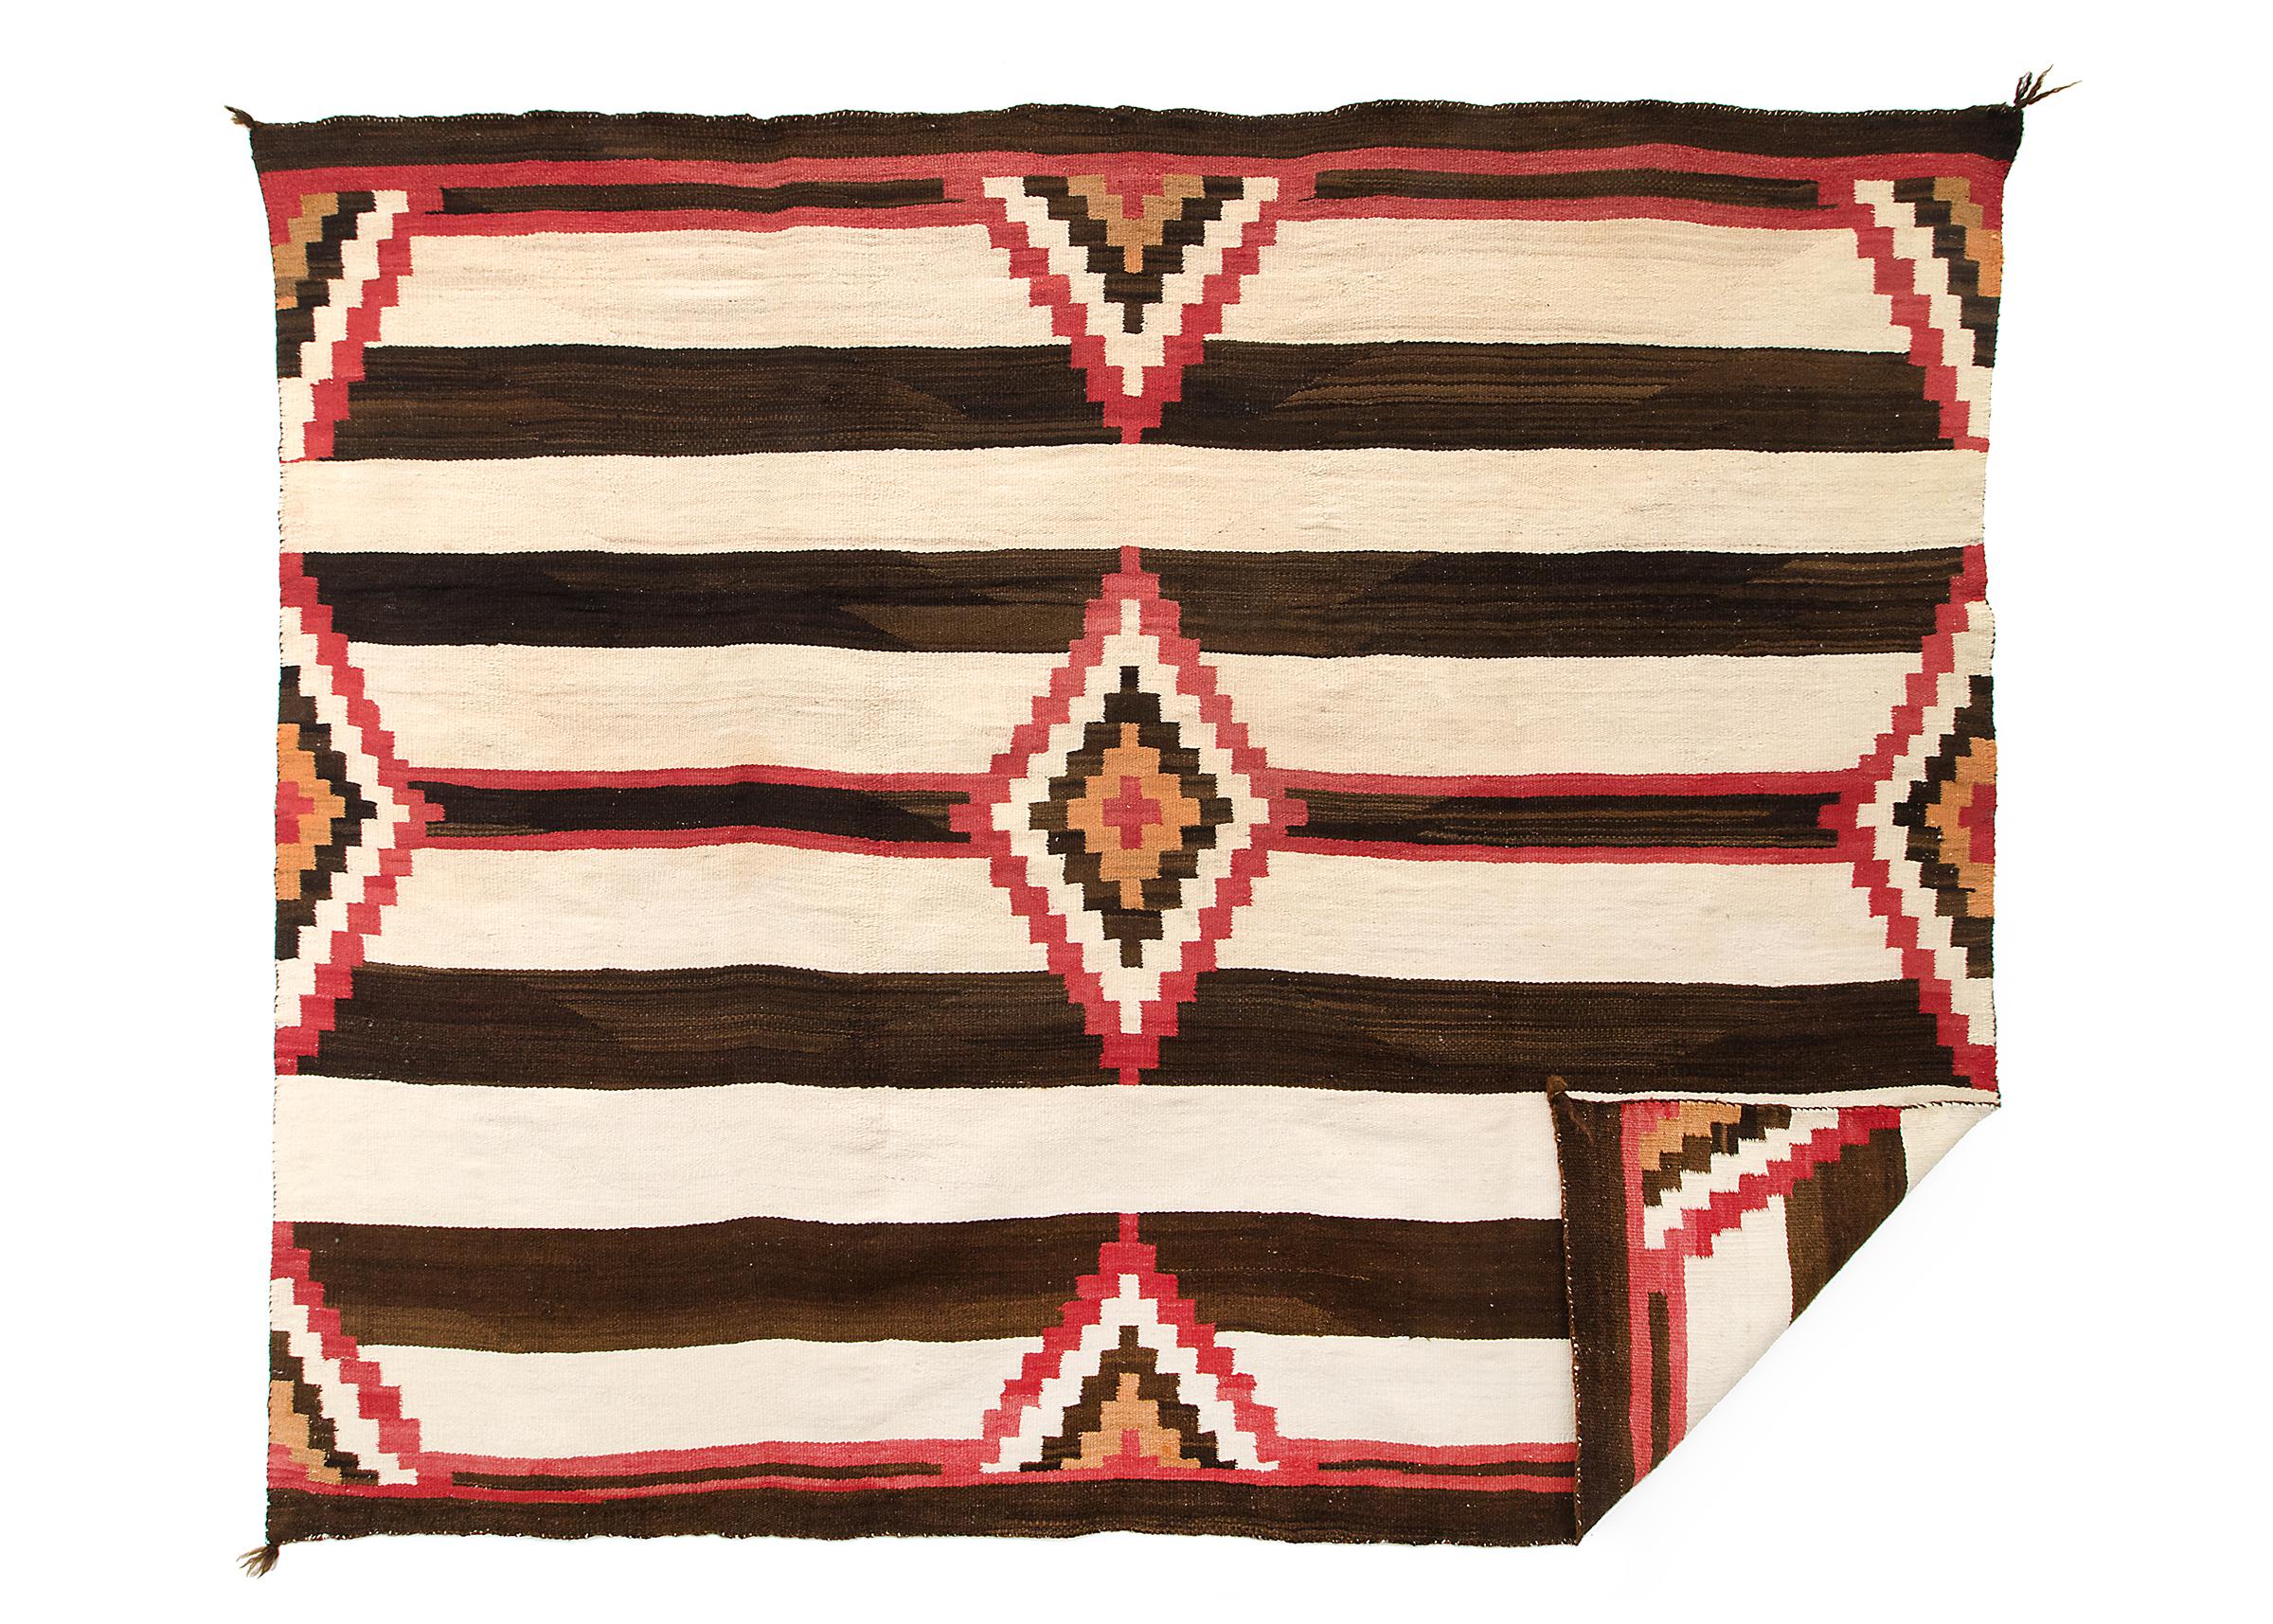 Authentic Third Phase Navajo Chiefs wearing blanket with a nine point diamond pattern against a Classic banded ground dating to the late 19th or early 20th century. Handwoven of native hand spun wool with natural fleece in ivory and brown-black with